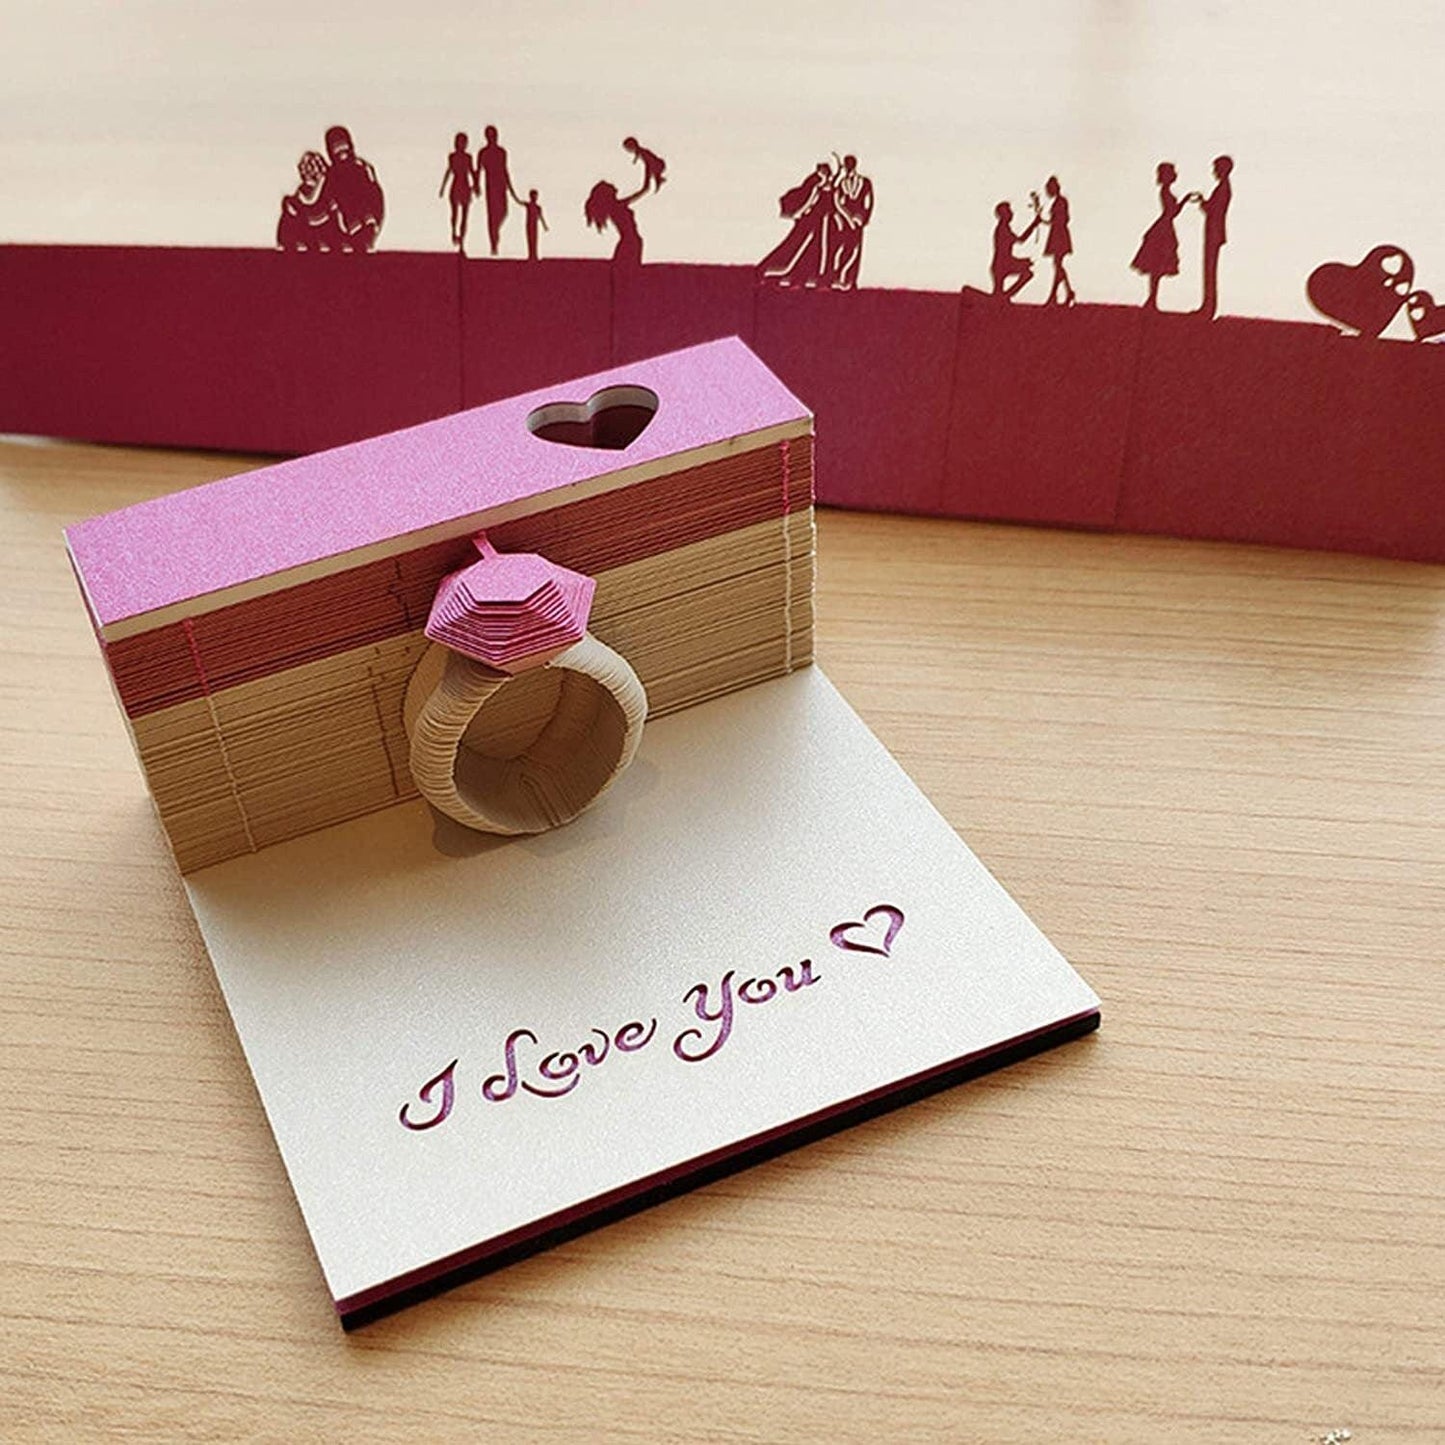 Proposal Ring 3D Note Pad - Creative Memo Pad - Omoshiroi Block - Romantic Gift - Engagement Ring - Gift For Love - Stationery Toys With LED - Rajbharti Crafts